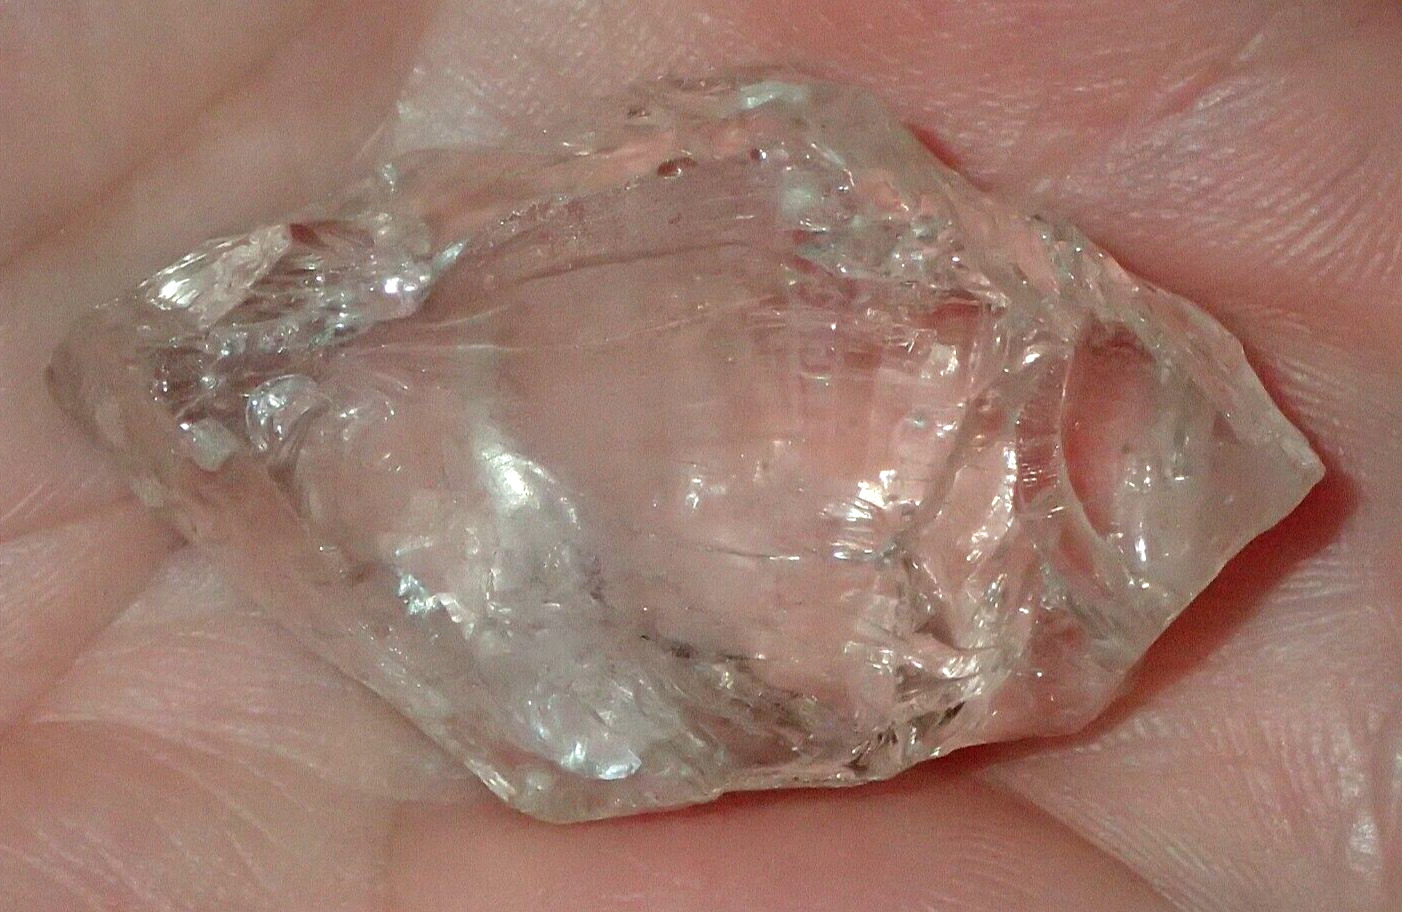 24mm Untreated, Unheated Natural Rough Colorless Beryl Stone, 110 Carat, #S6238